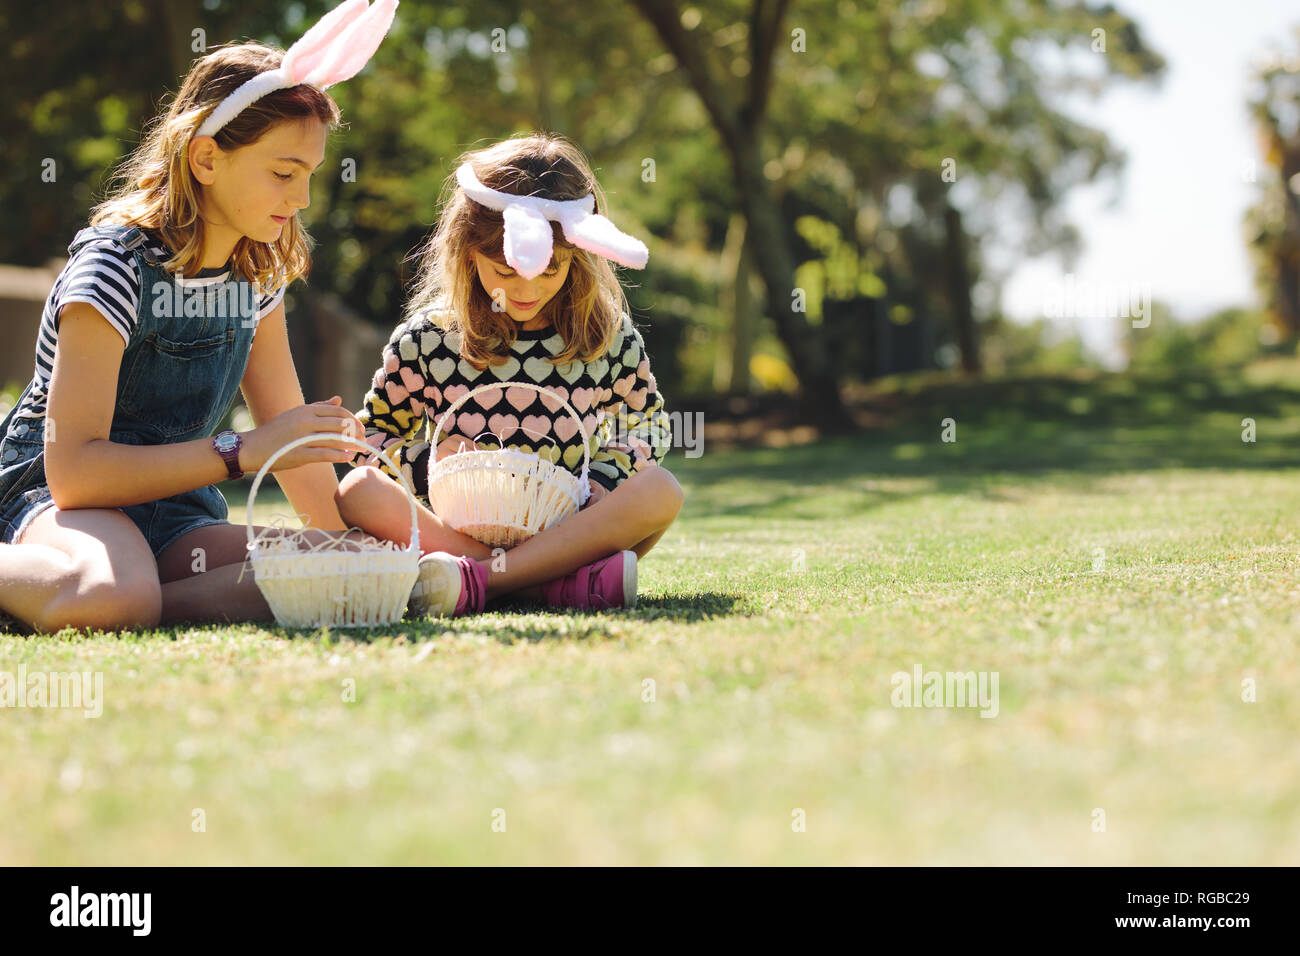 Two girls wearing rabbit ear headband playing in the backyard with baskets. Kids sitting on grass playing together on a sunny day. Stock Photo